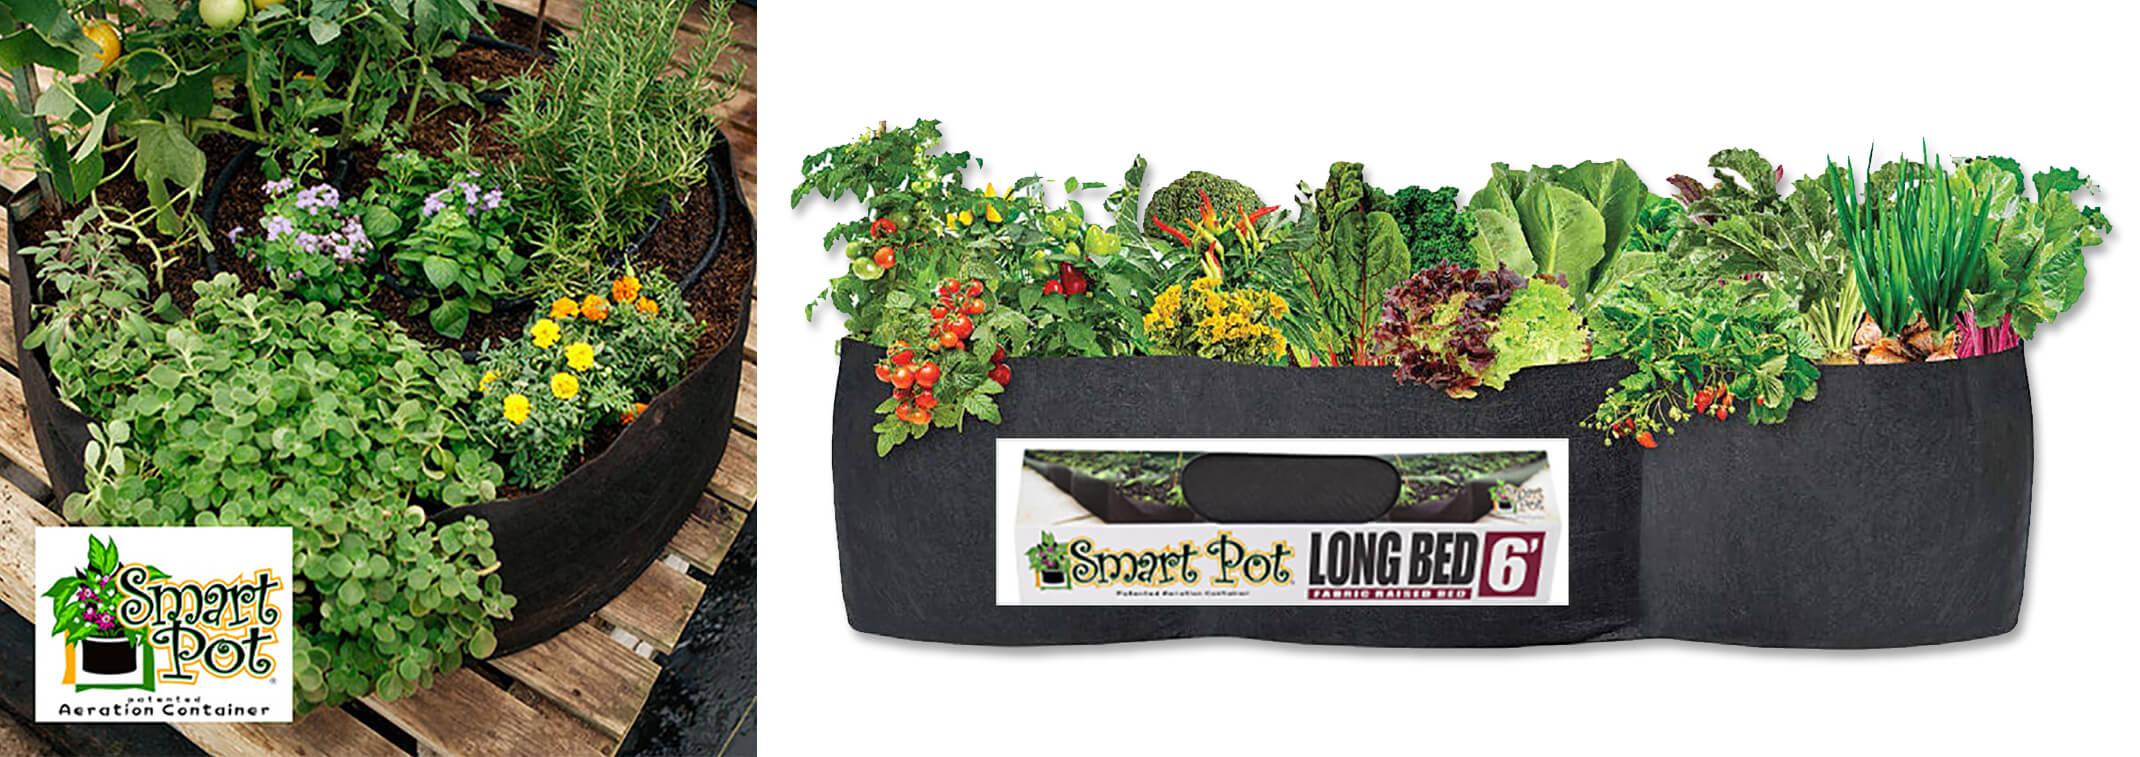 2 images: a round smart pot filled with a variety of plants; and a long bed smart pot filled with a variety of plants